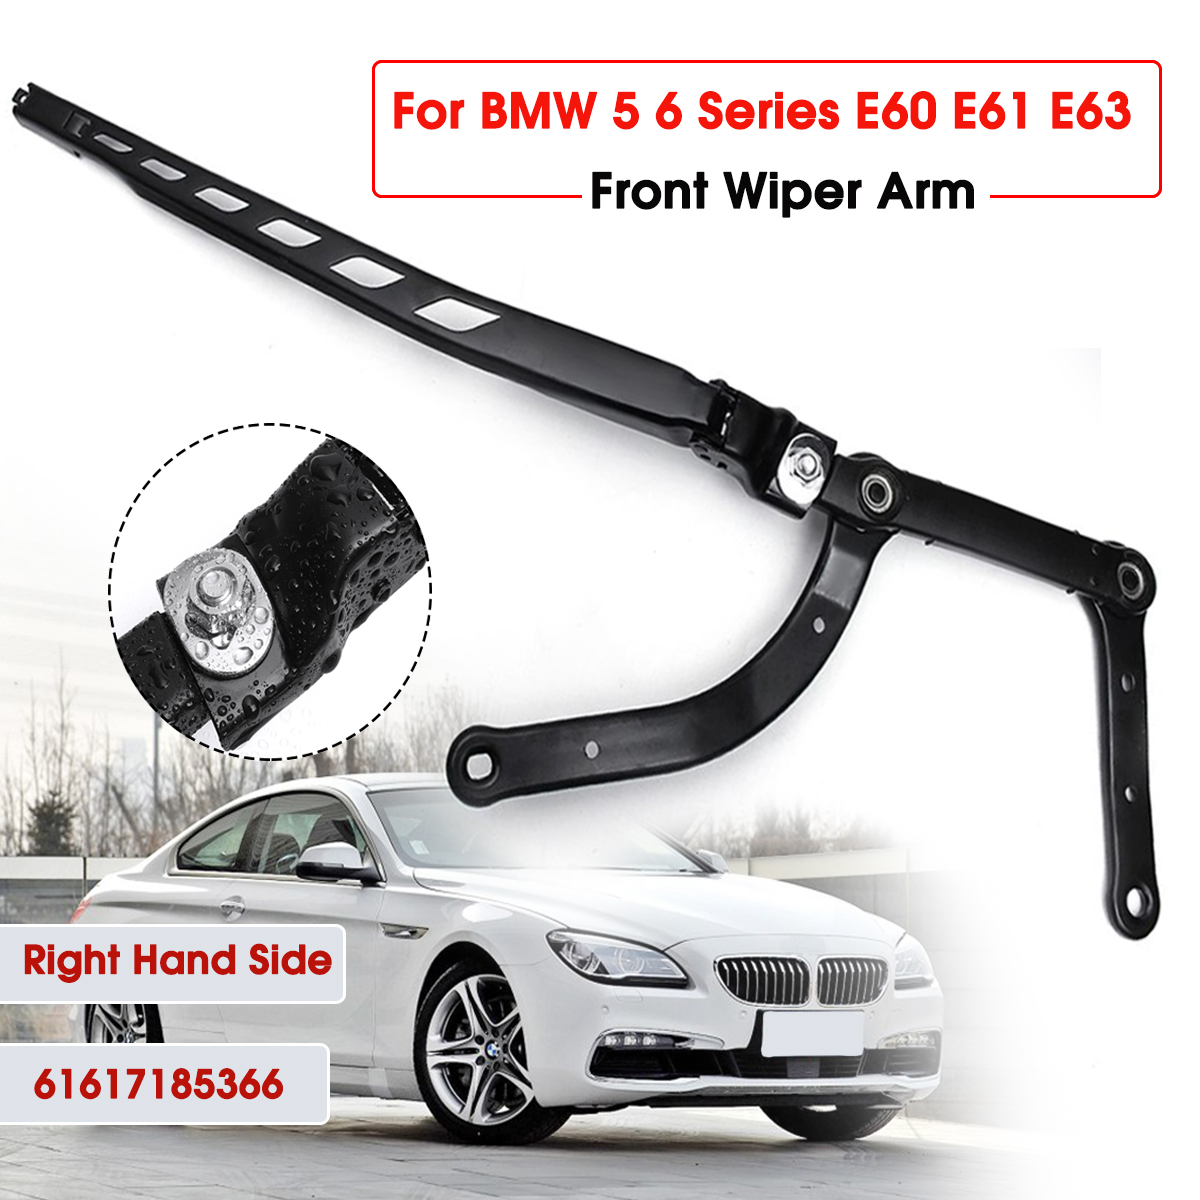 BRAS ESSUIE-GLACE ARRIERE COMPLET NEUF POUR BMW 5 F11 Touring 10-350 mm